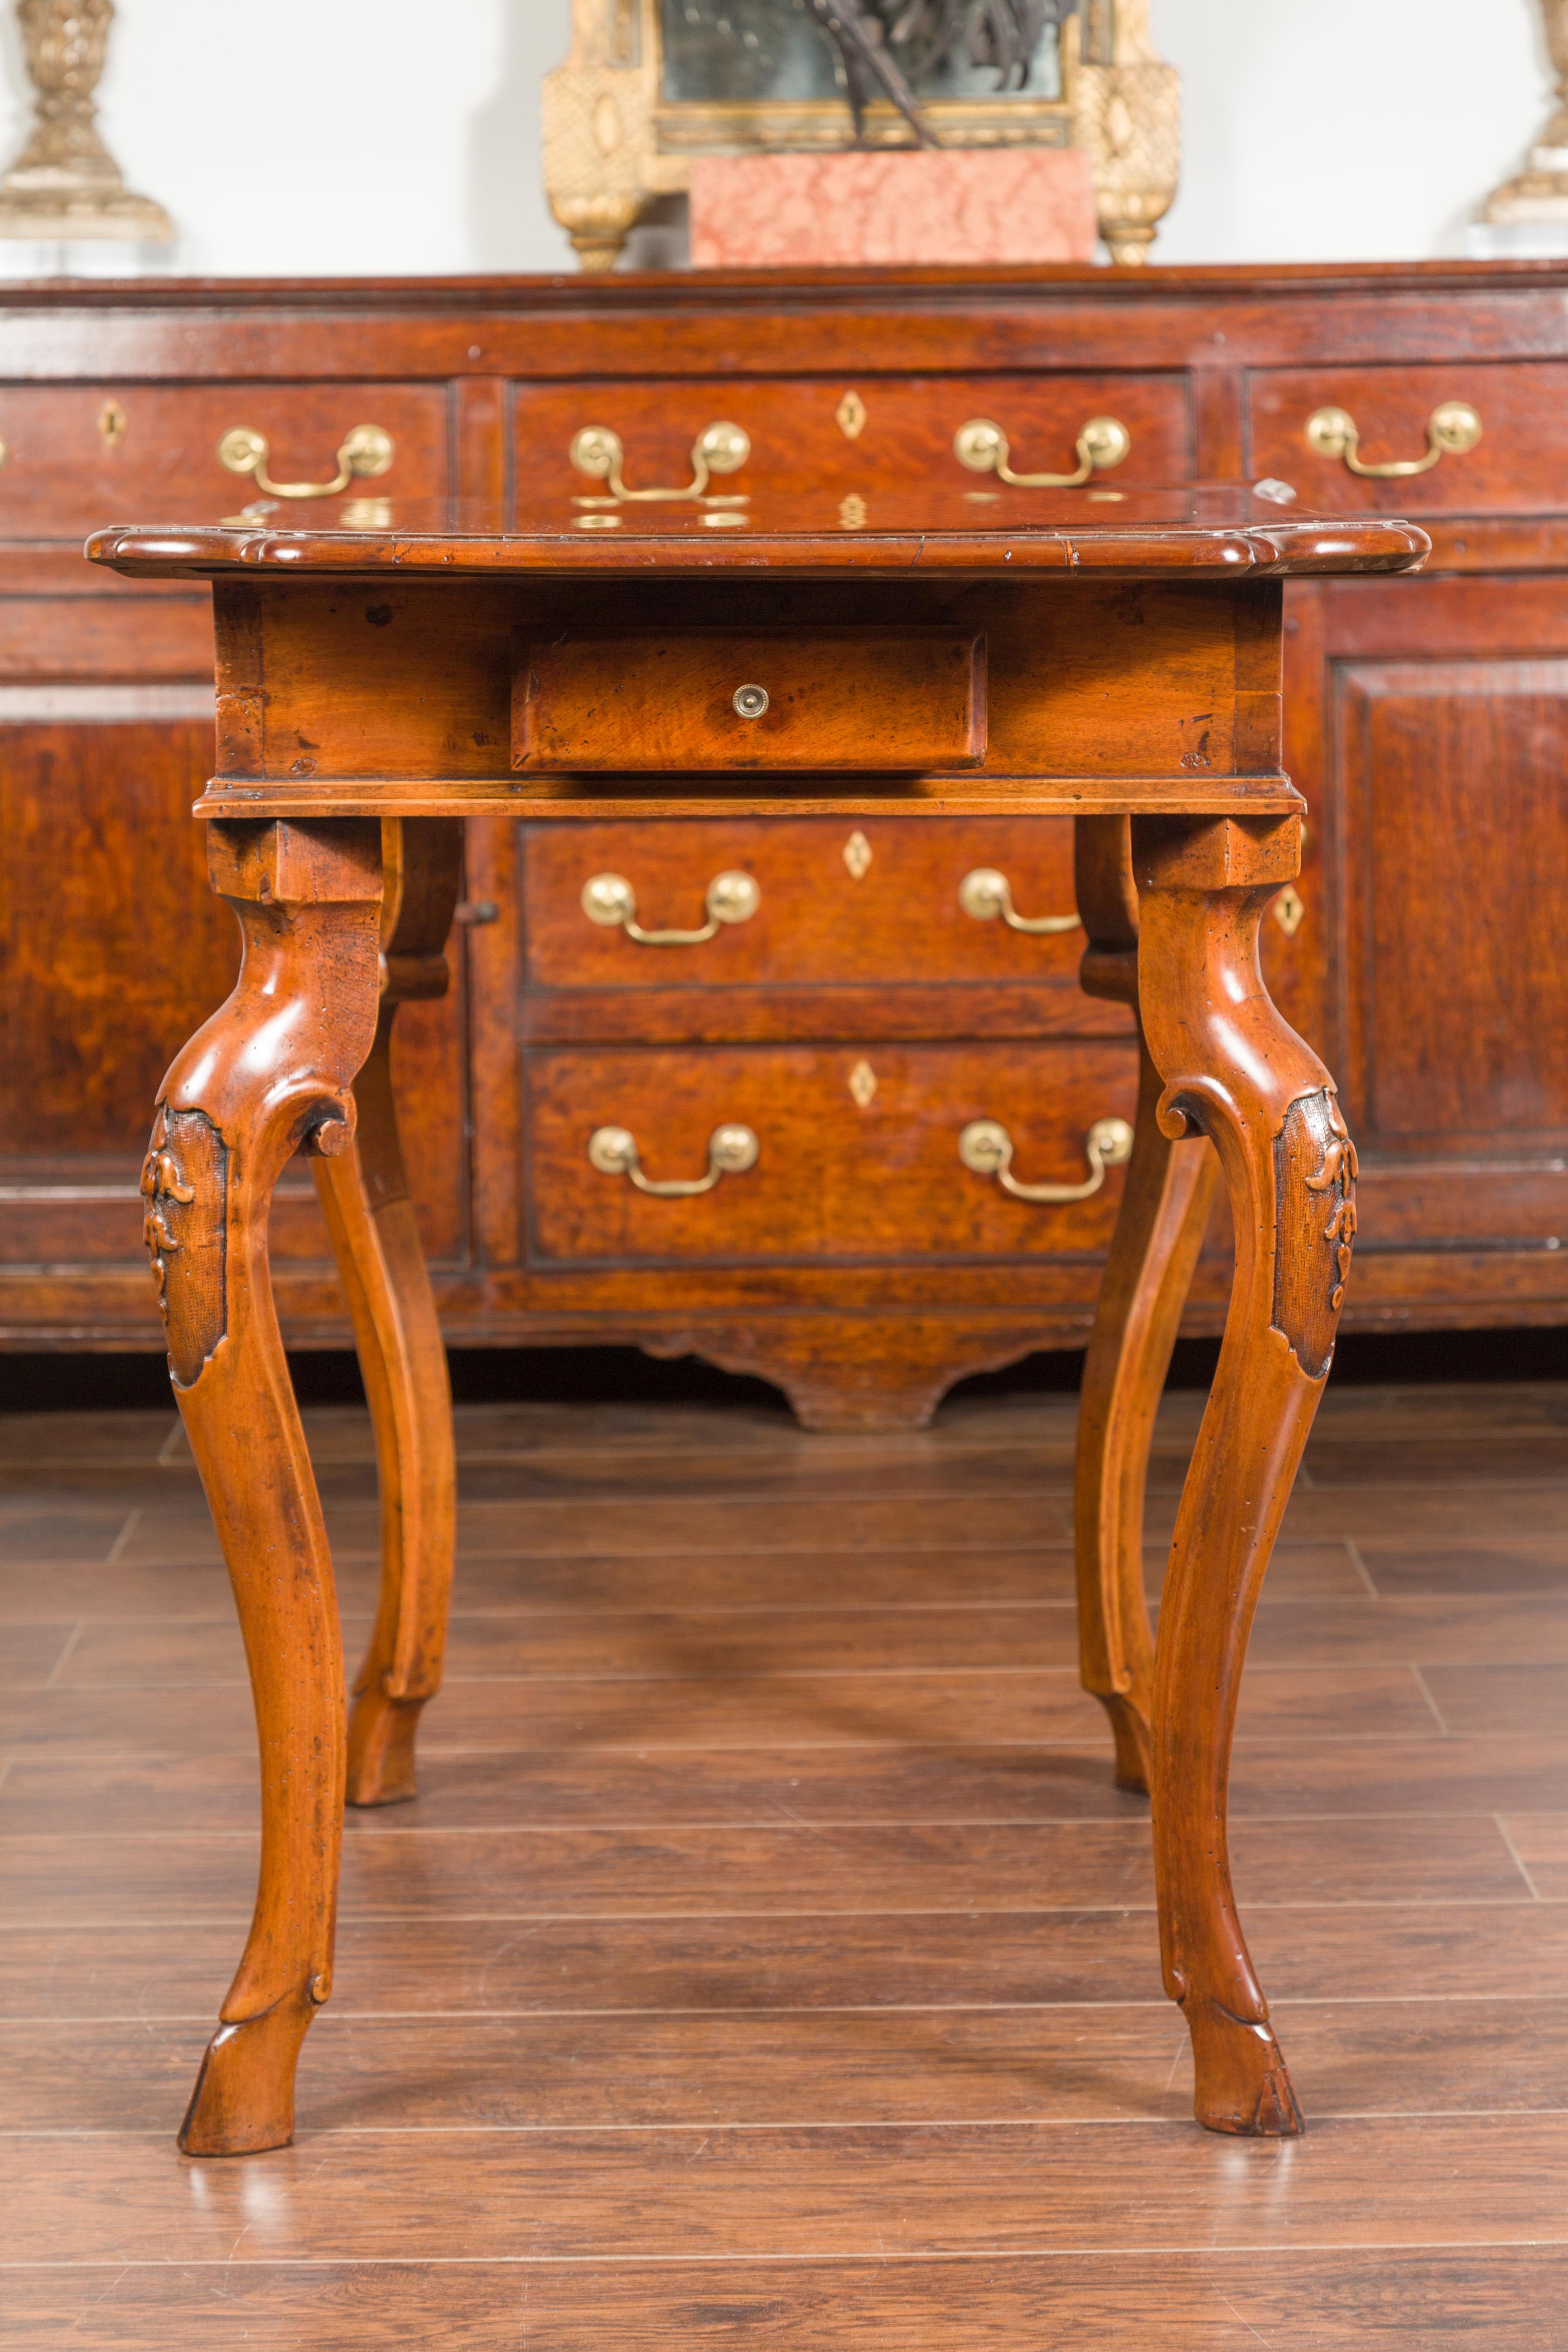 Northern Italian 1720s Régence Walnut Side Table with Four Drawers and Cabrioles 12